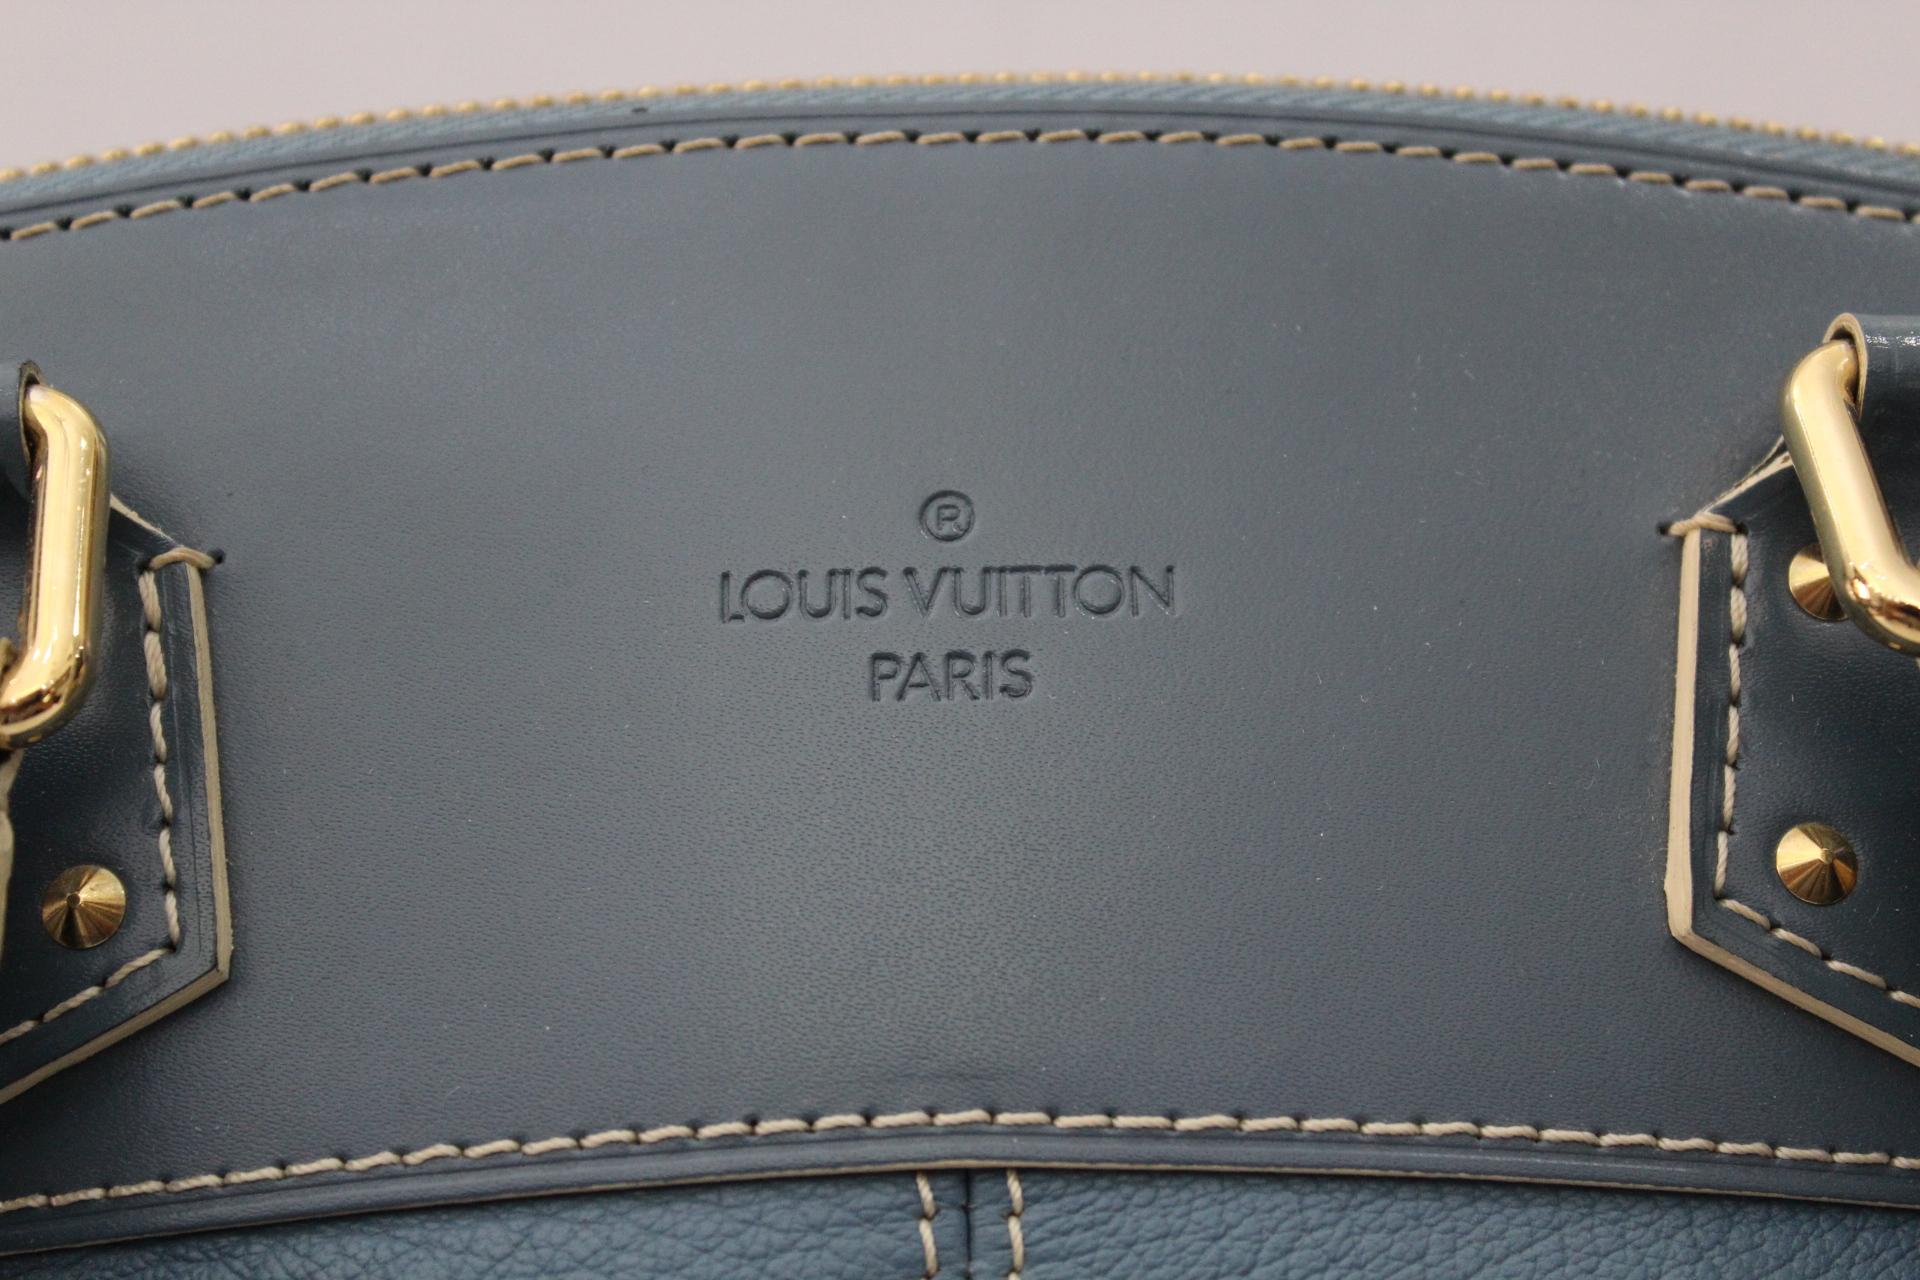 Very elegant Louis Vuitton bag model Lockit Suhali MM colored sugar paper. Made of goat leather, it is a mix between a classic and modern style. Zipper closure, gold trim. Excellent condition.